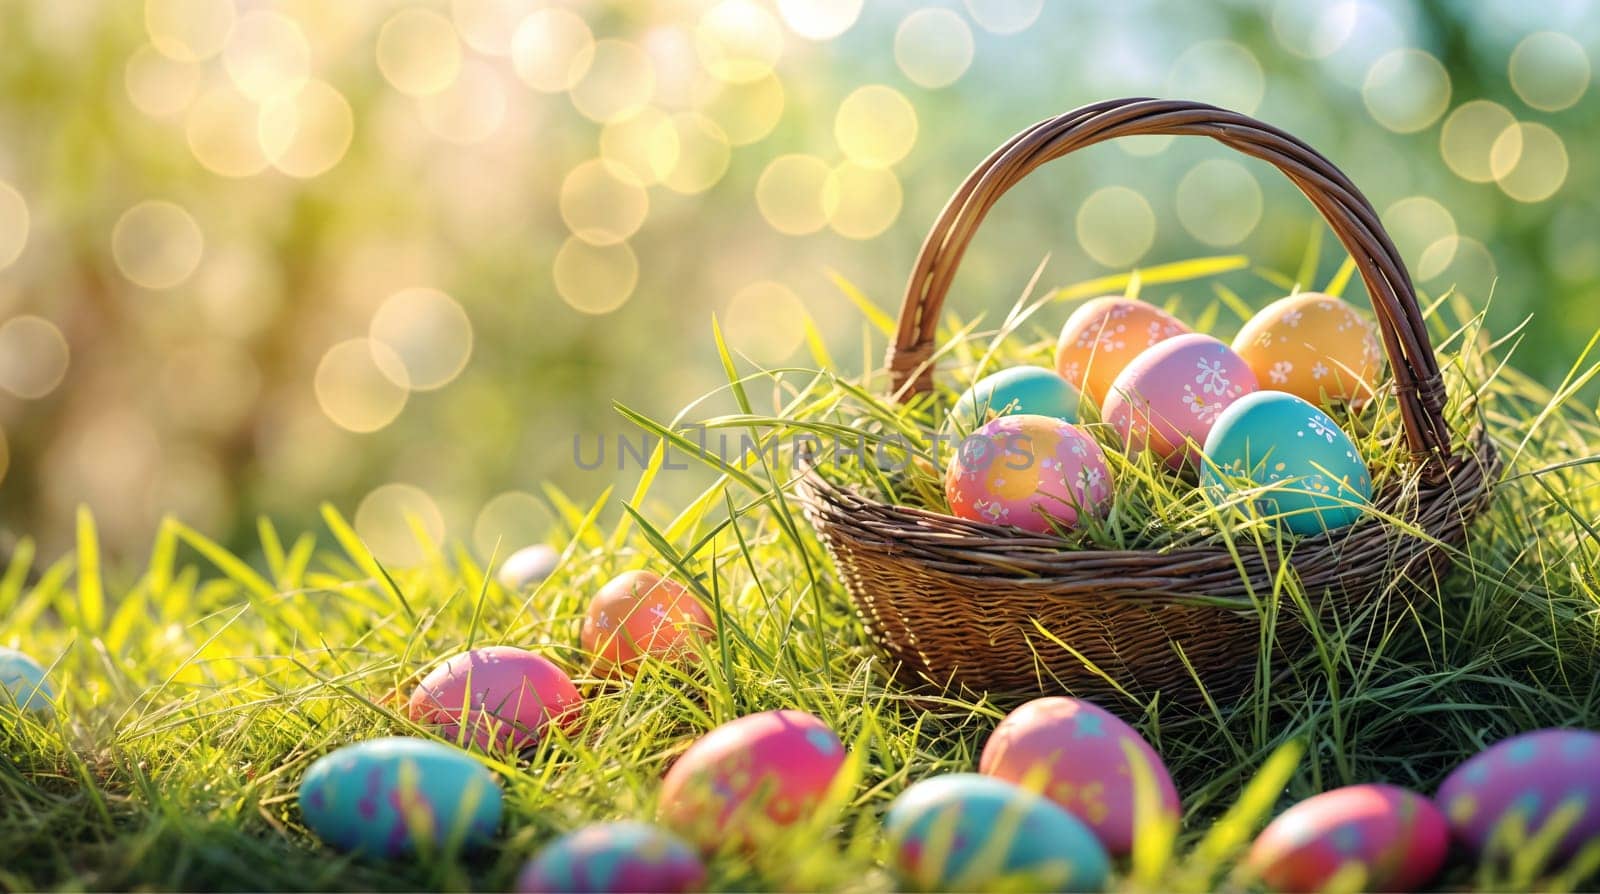 A wicker basket filled with colored Easter eggs sits in the lush green grass, The surrounding area is dotted with more scattered Easter eggs, hinting at a festive egg hunt - Generative AI